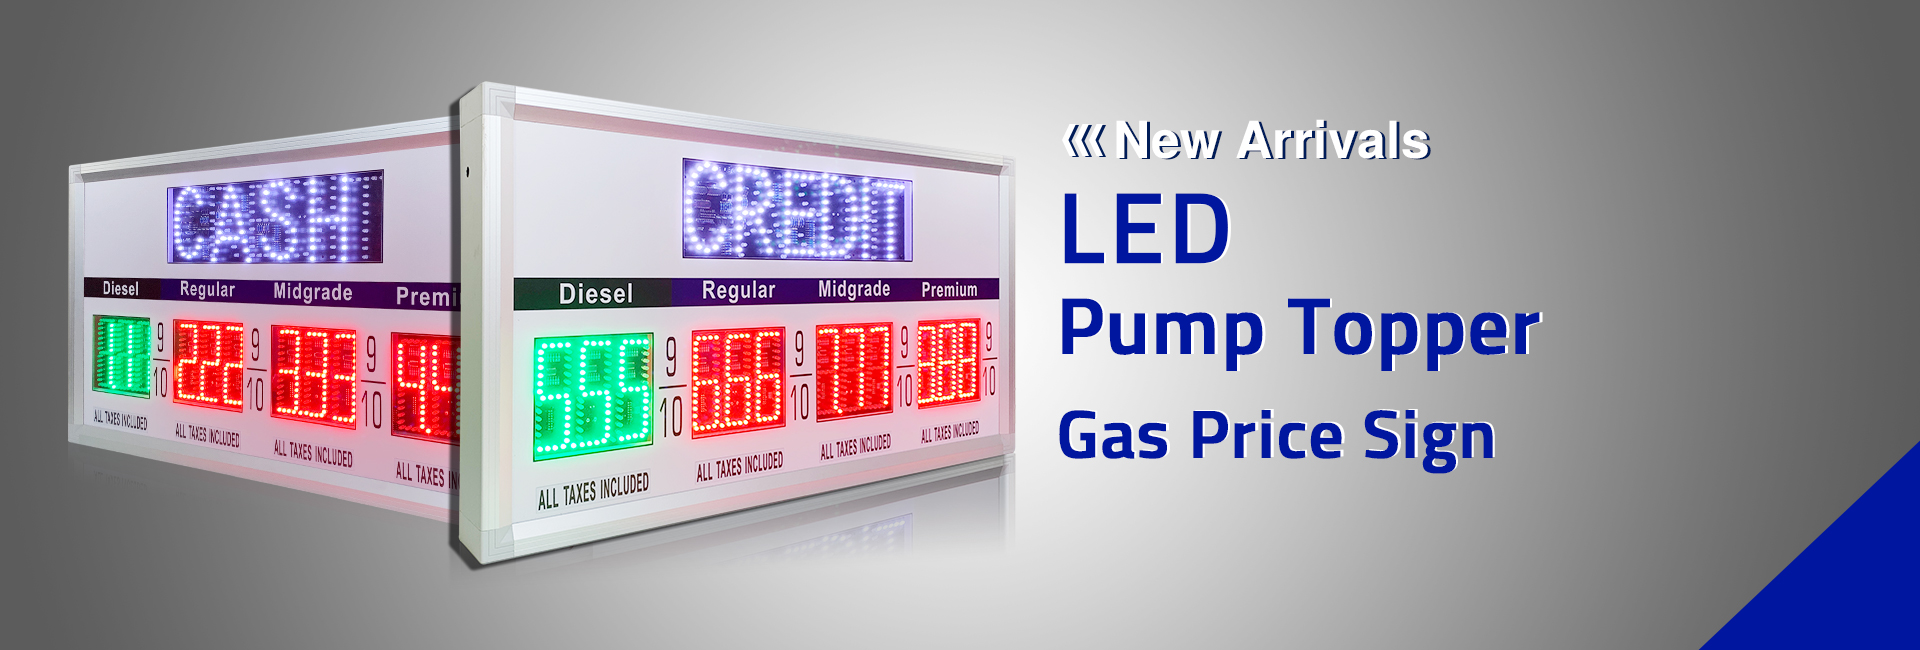 led pump topper gas price sign